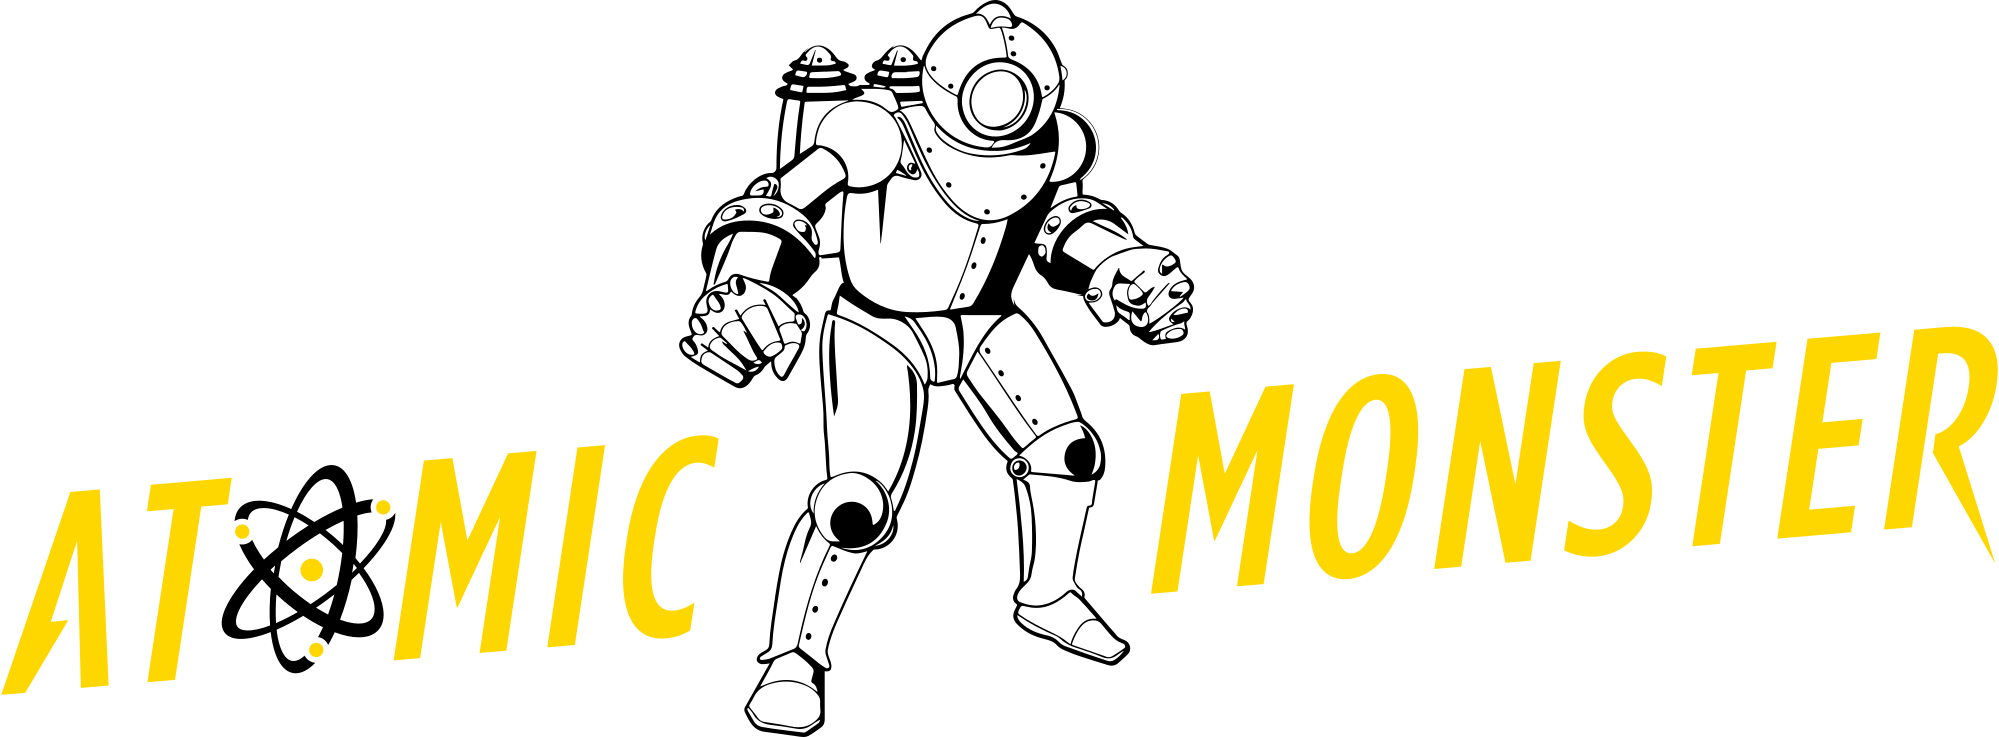 Atomic Monster - company